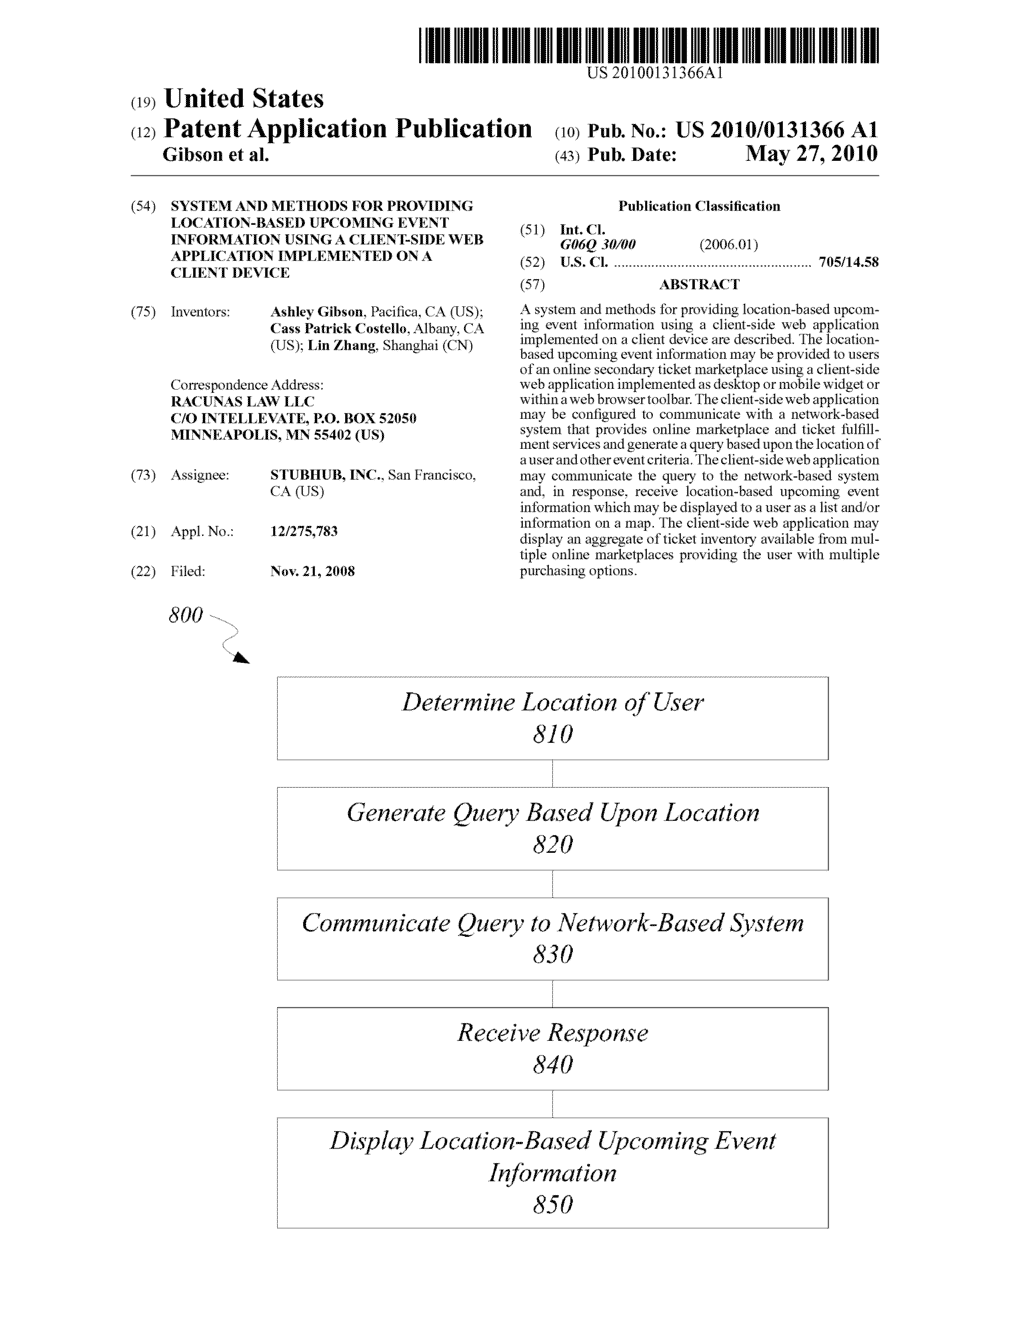 SYSTEM AND METHODS FOR PROVIDING LOCATION-BASED UPCOMING EVENT INFORMATION USING A CLIENT-SIDE WEB APPLICATION IMPLEMENTED ON A CLIENT DEVICE - diagram, schematic, and image 01